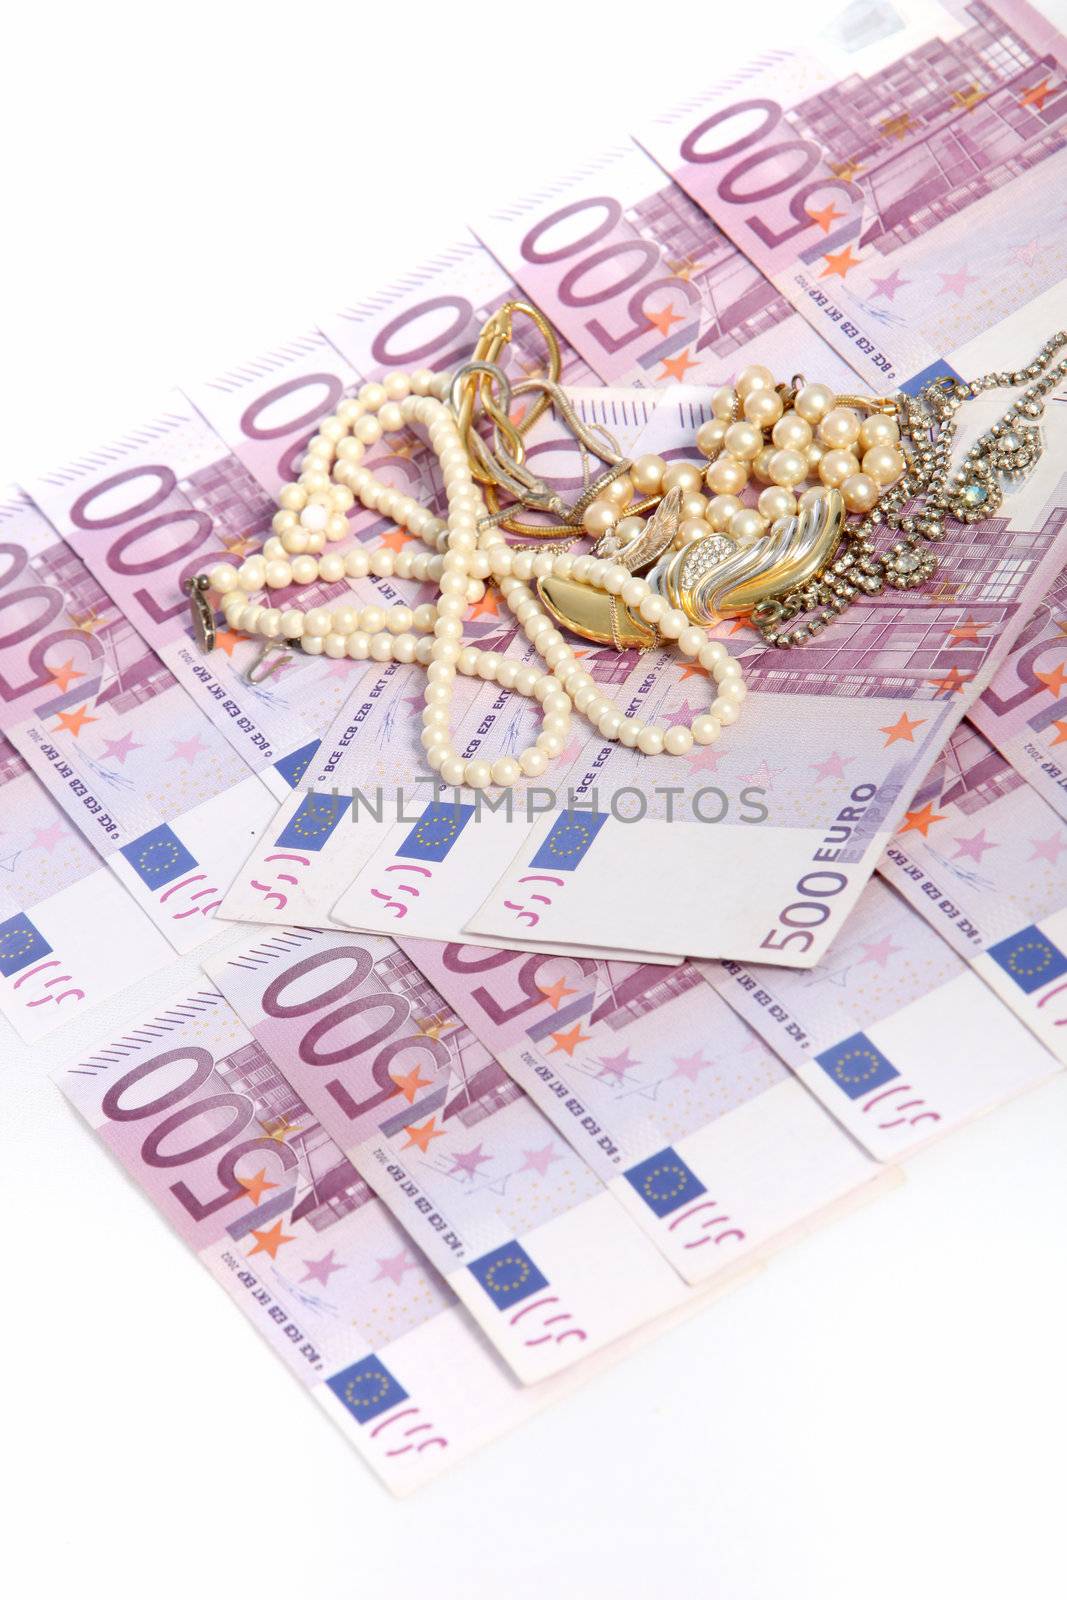 500 euro notes with jewellery by Farina6000